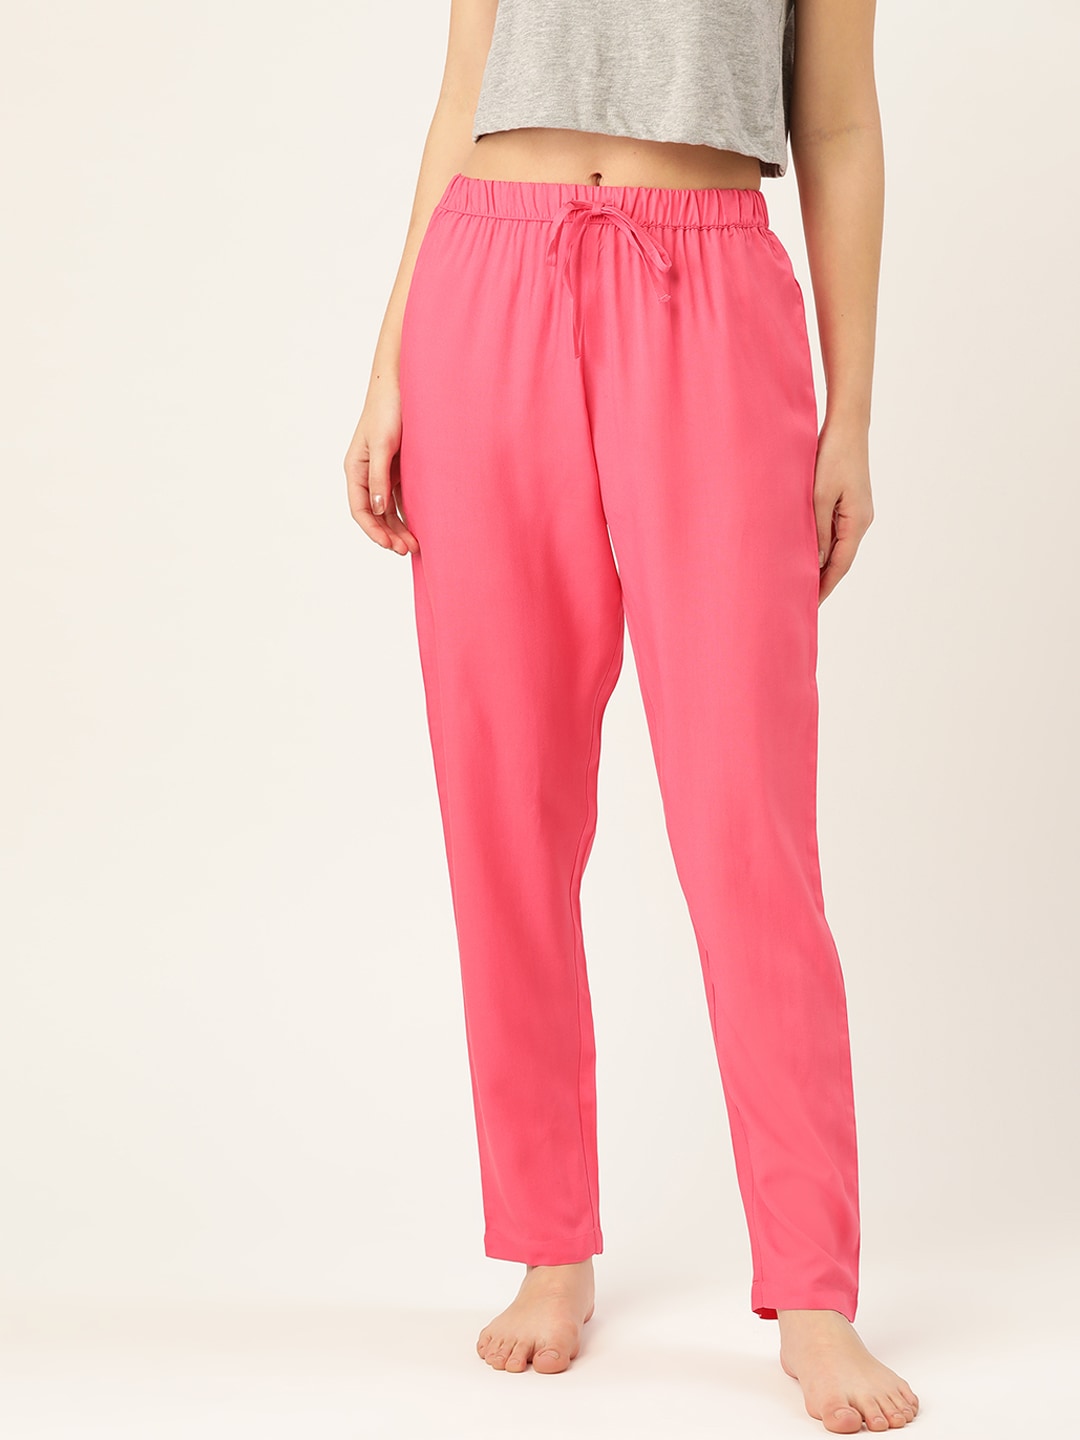 ETC Women Pink Solid Regular Fit Lounge Pants Price in India